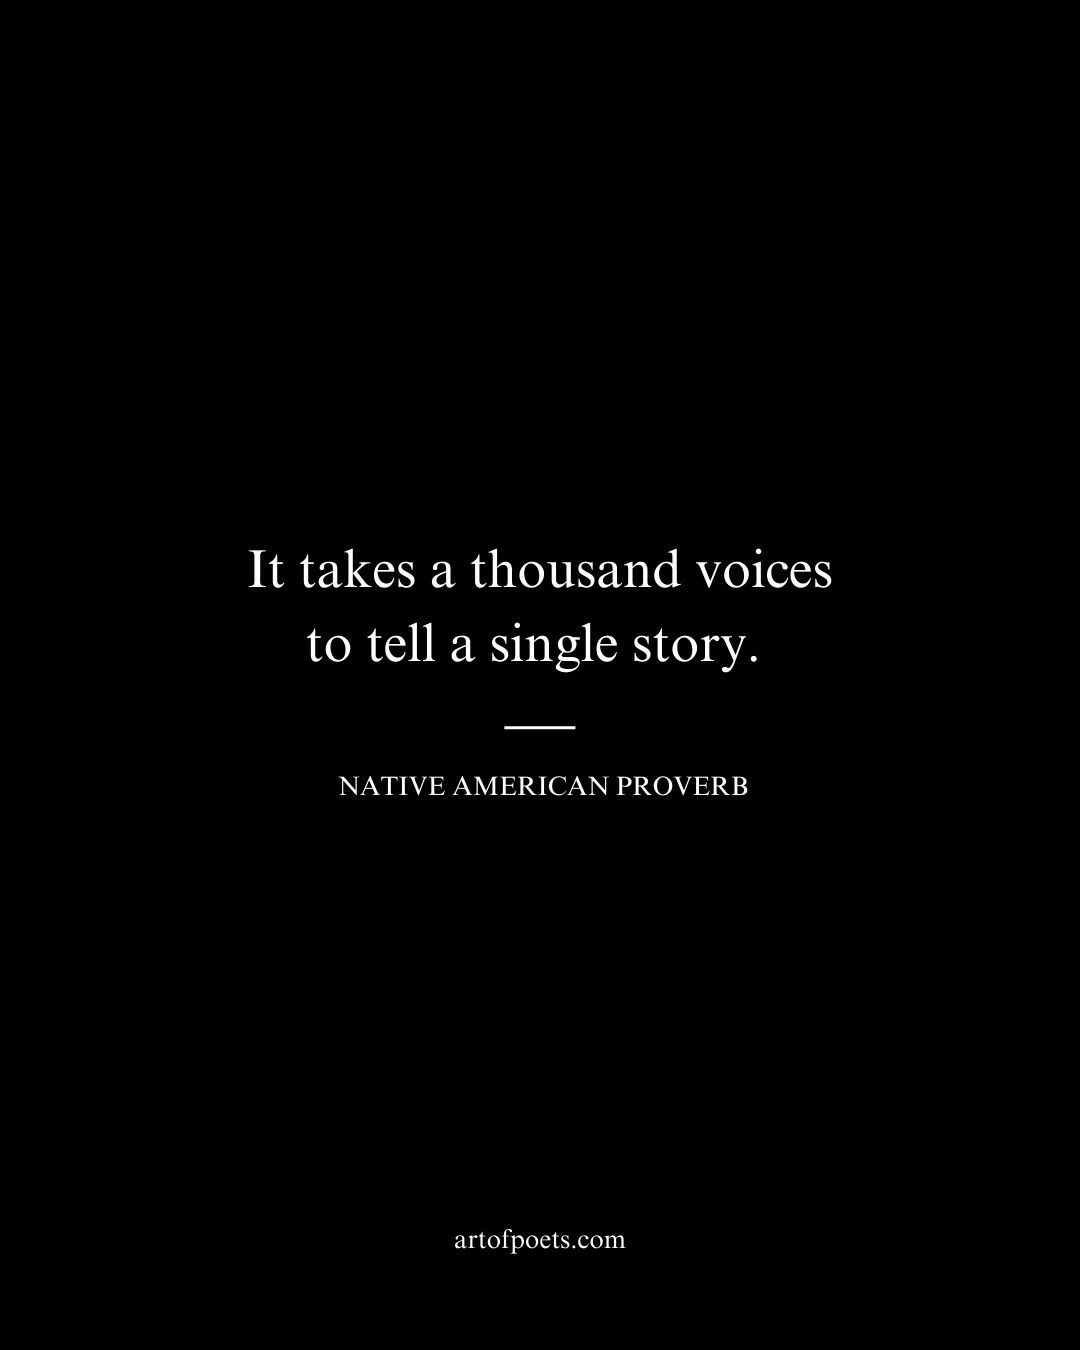 It takes a thousand voices to tell a single story